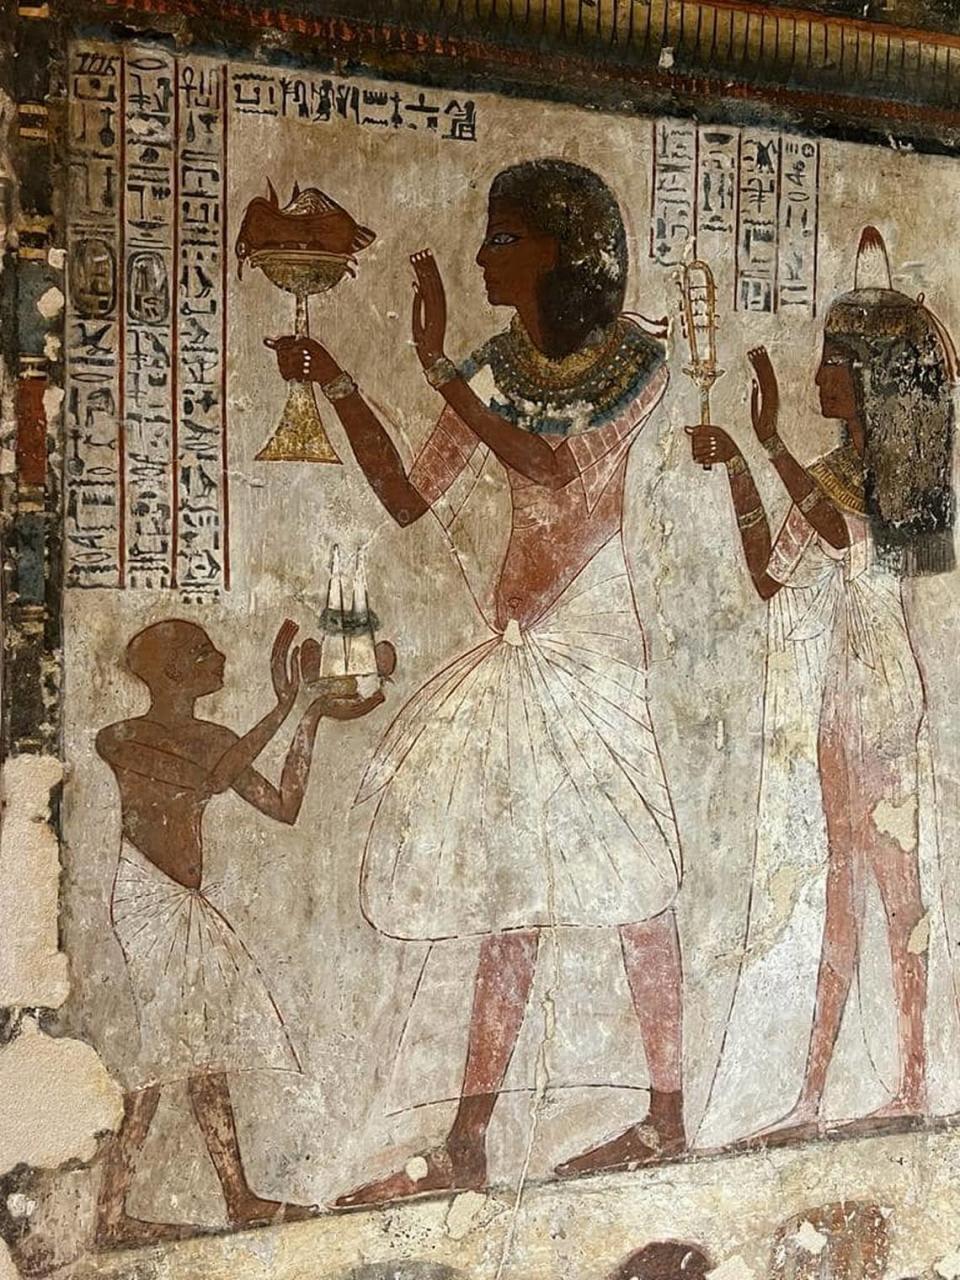 One of the restored paintings inside the tomb of Neferhotep. Photo from Egypt’s Ministry of Tourism and Antiquities